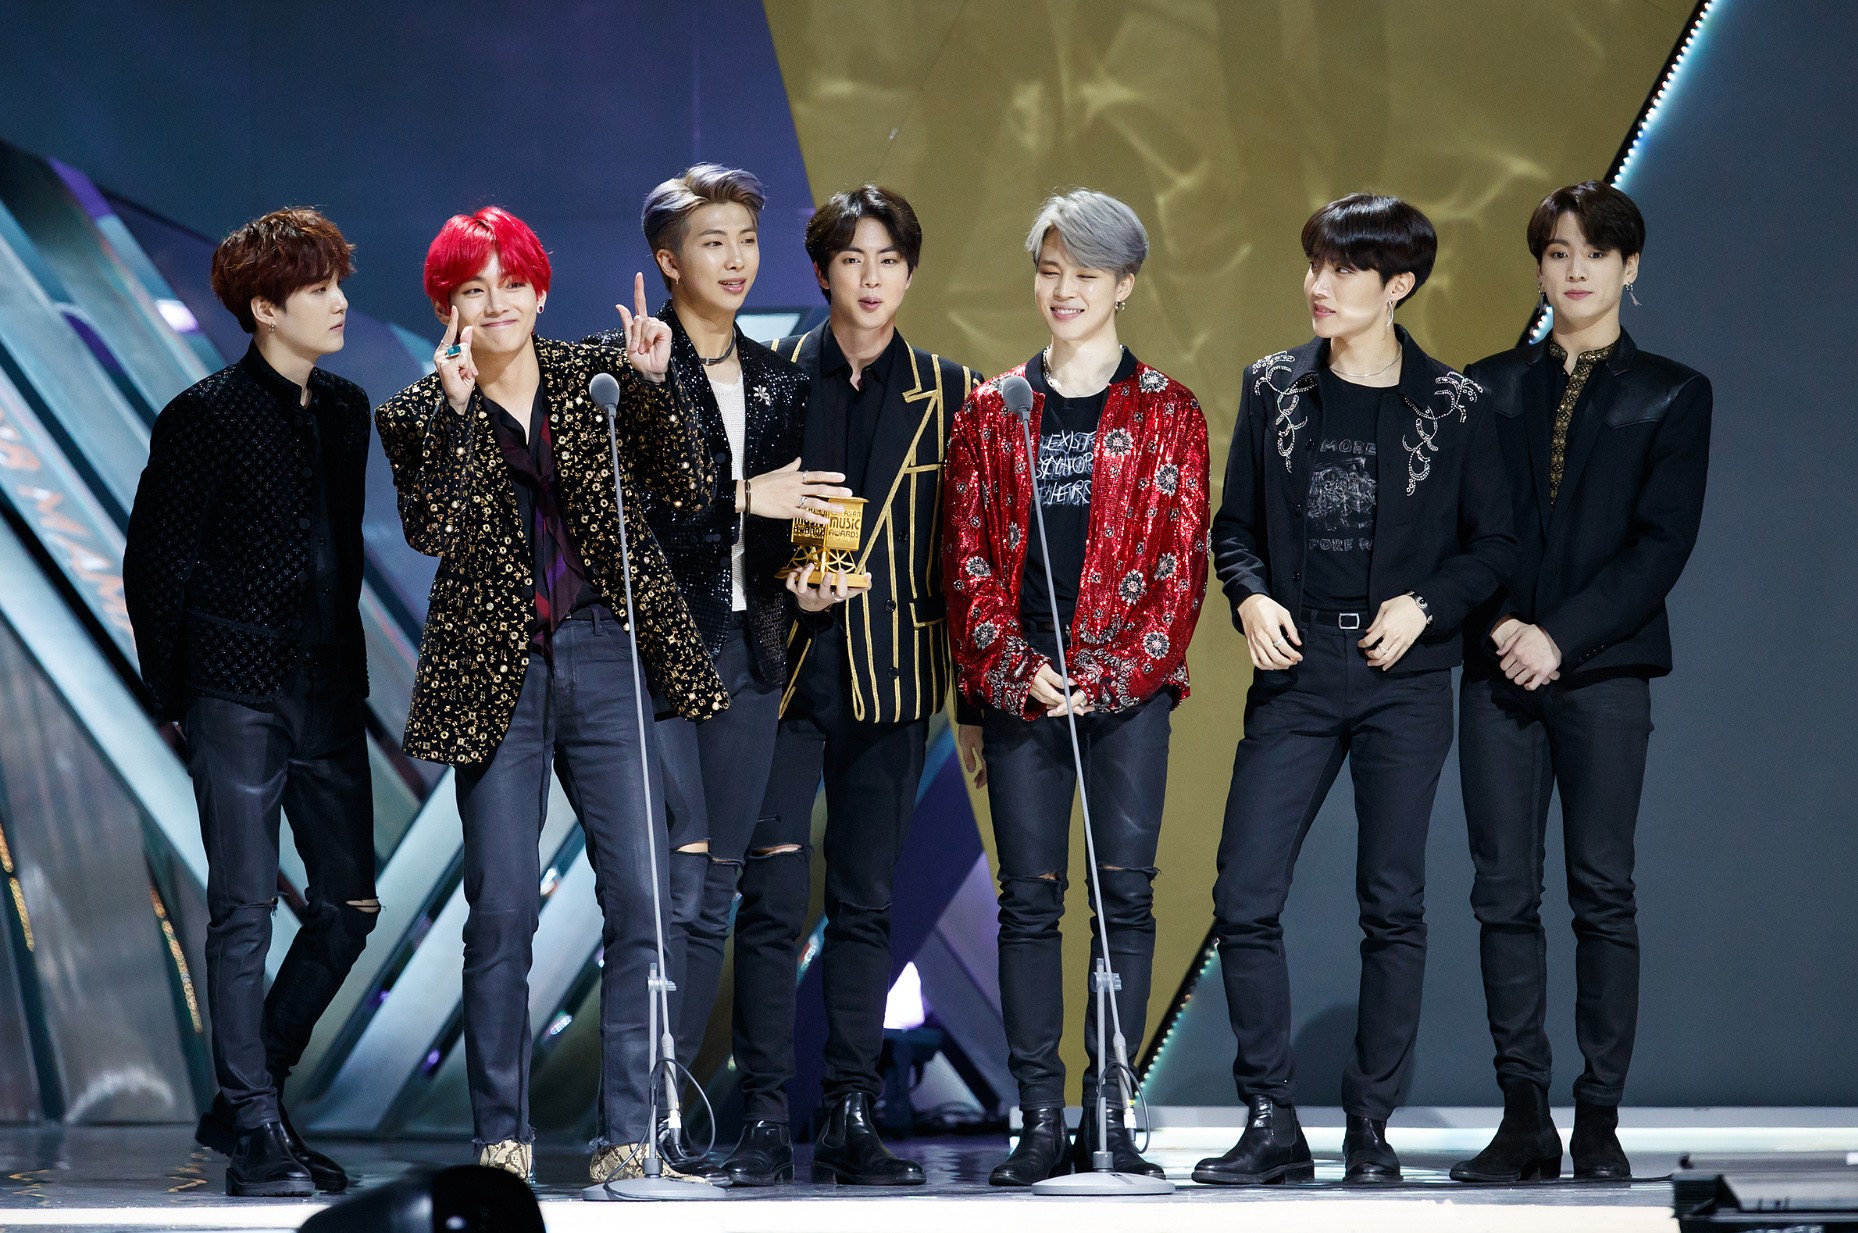 K-pop group BTS receive the Album of the Year at last year’s awards. Photo: MAMA